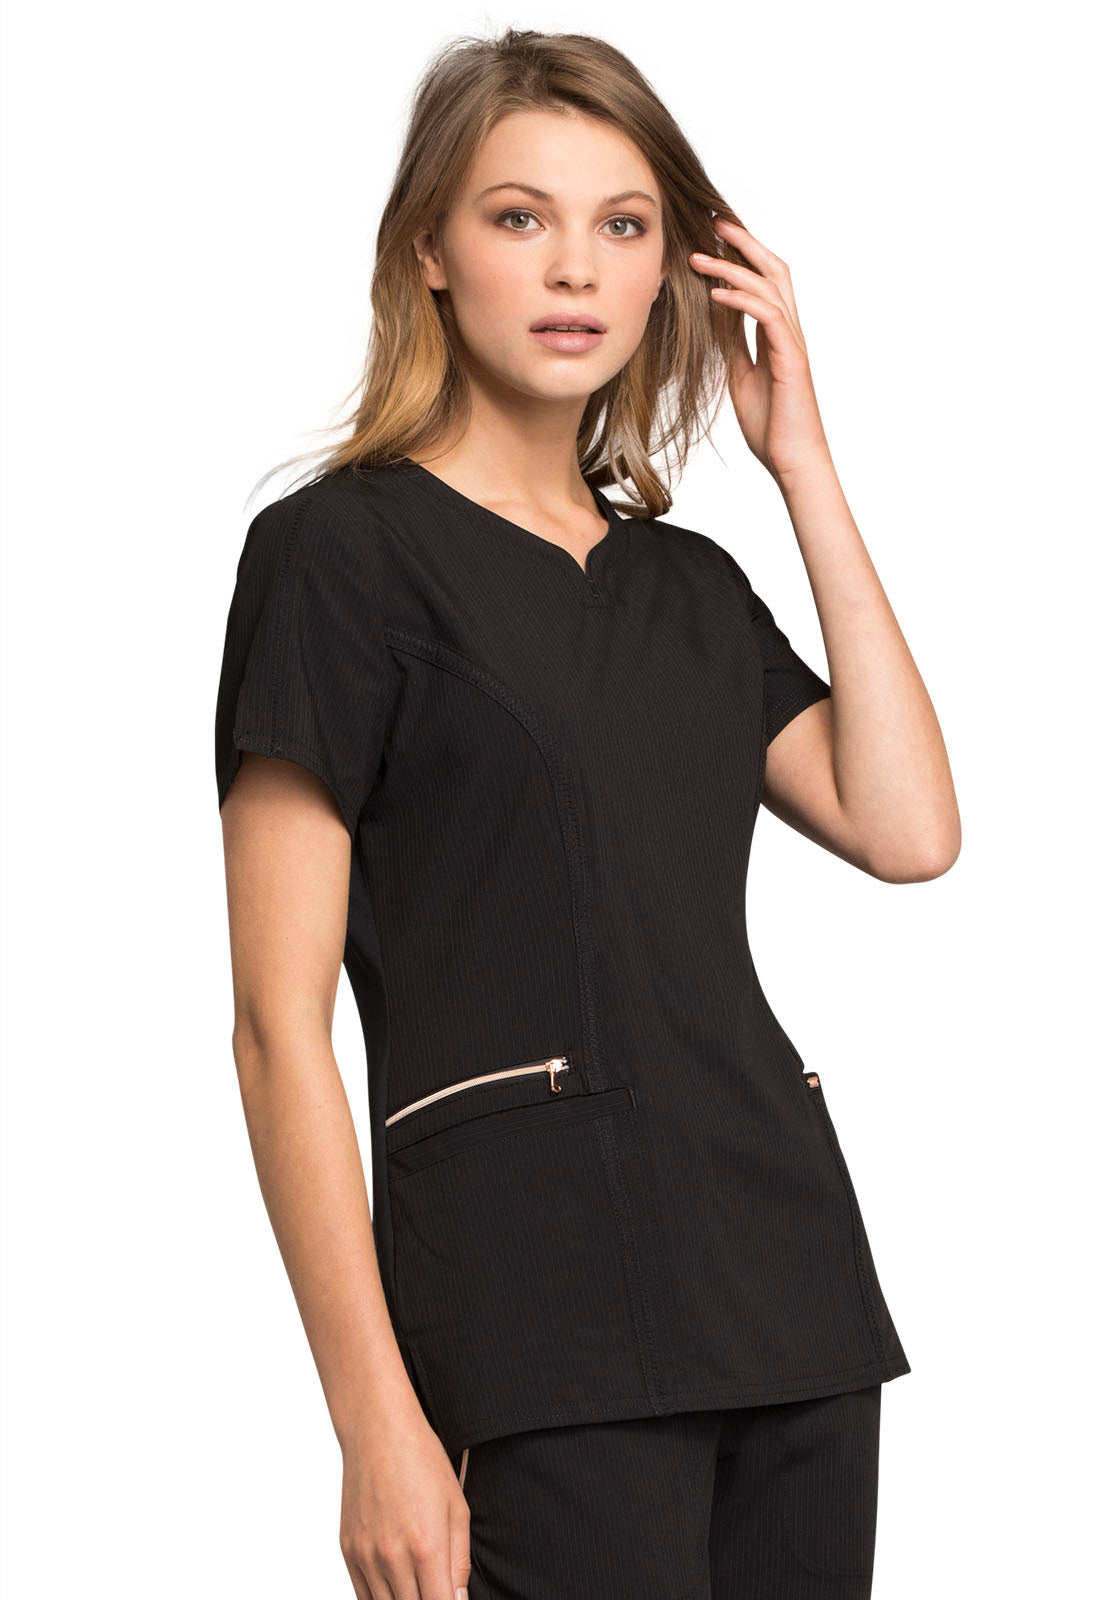 Cherokee Statement Ribbed V-Neck Top in Black AMOST GONE!